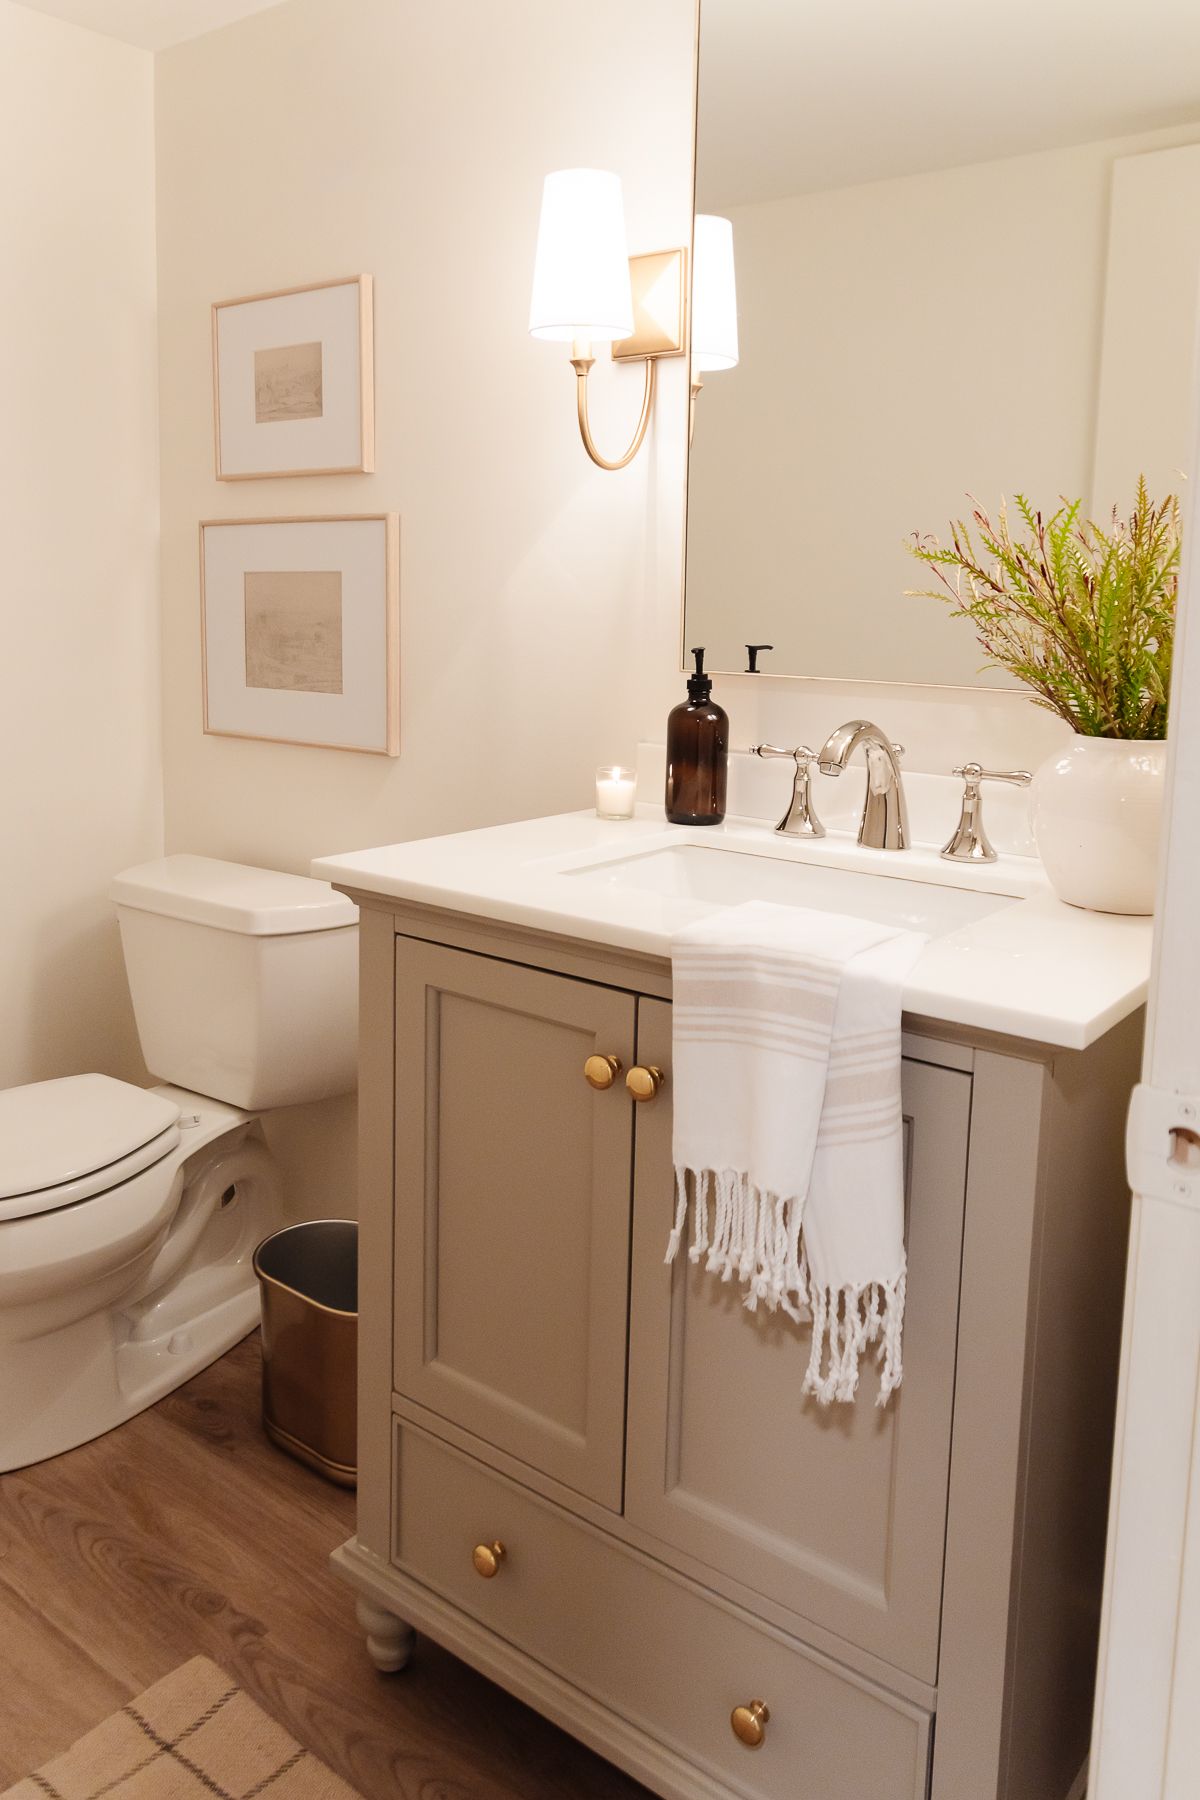 A bathroom in basement with gold sconces and a mushroom paint color on the vanity